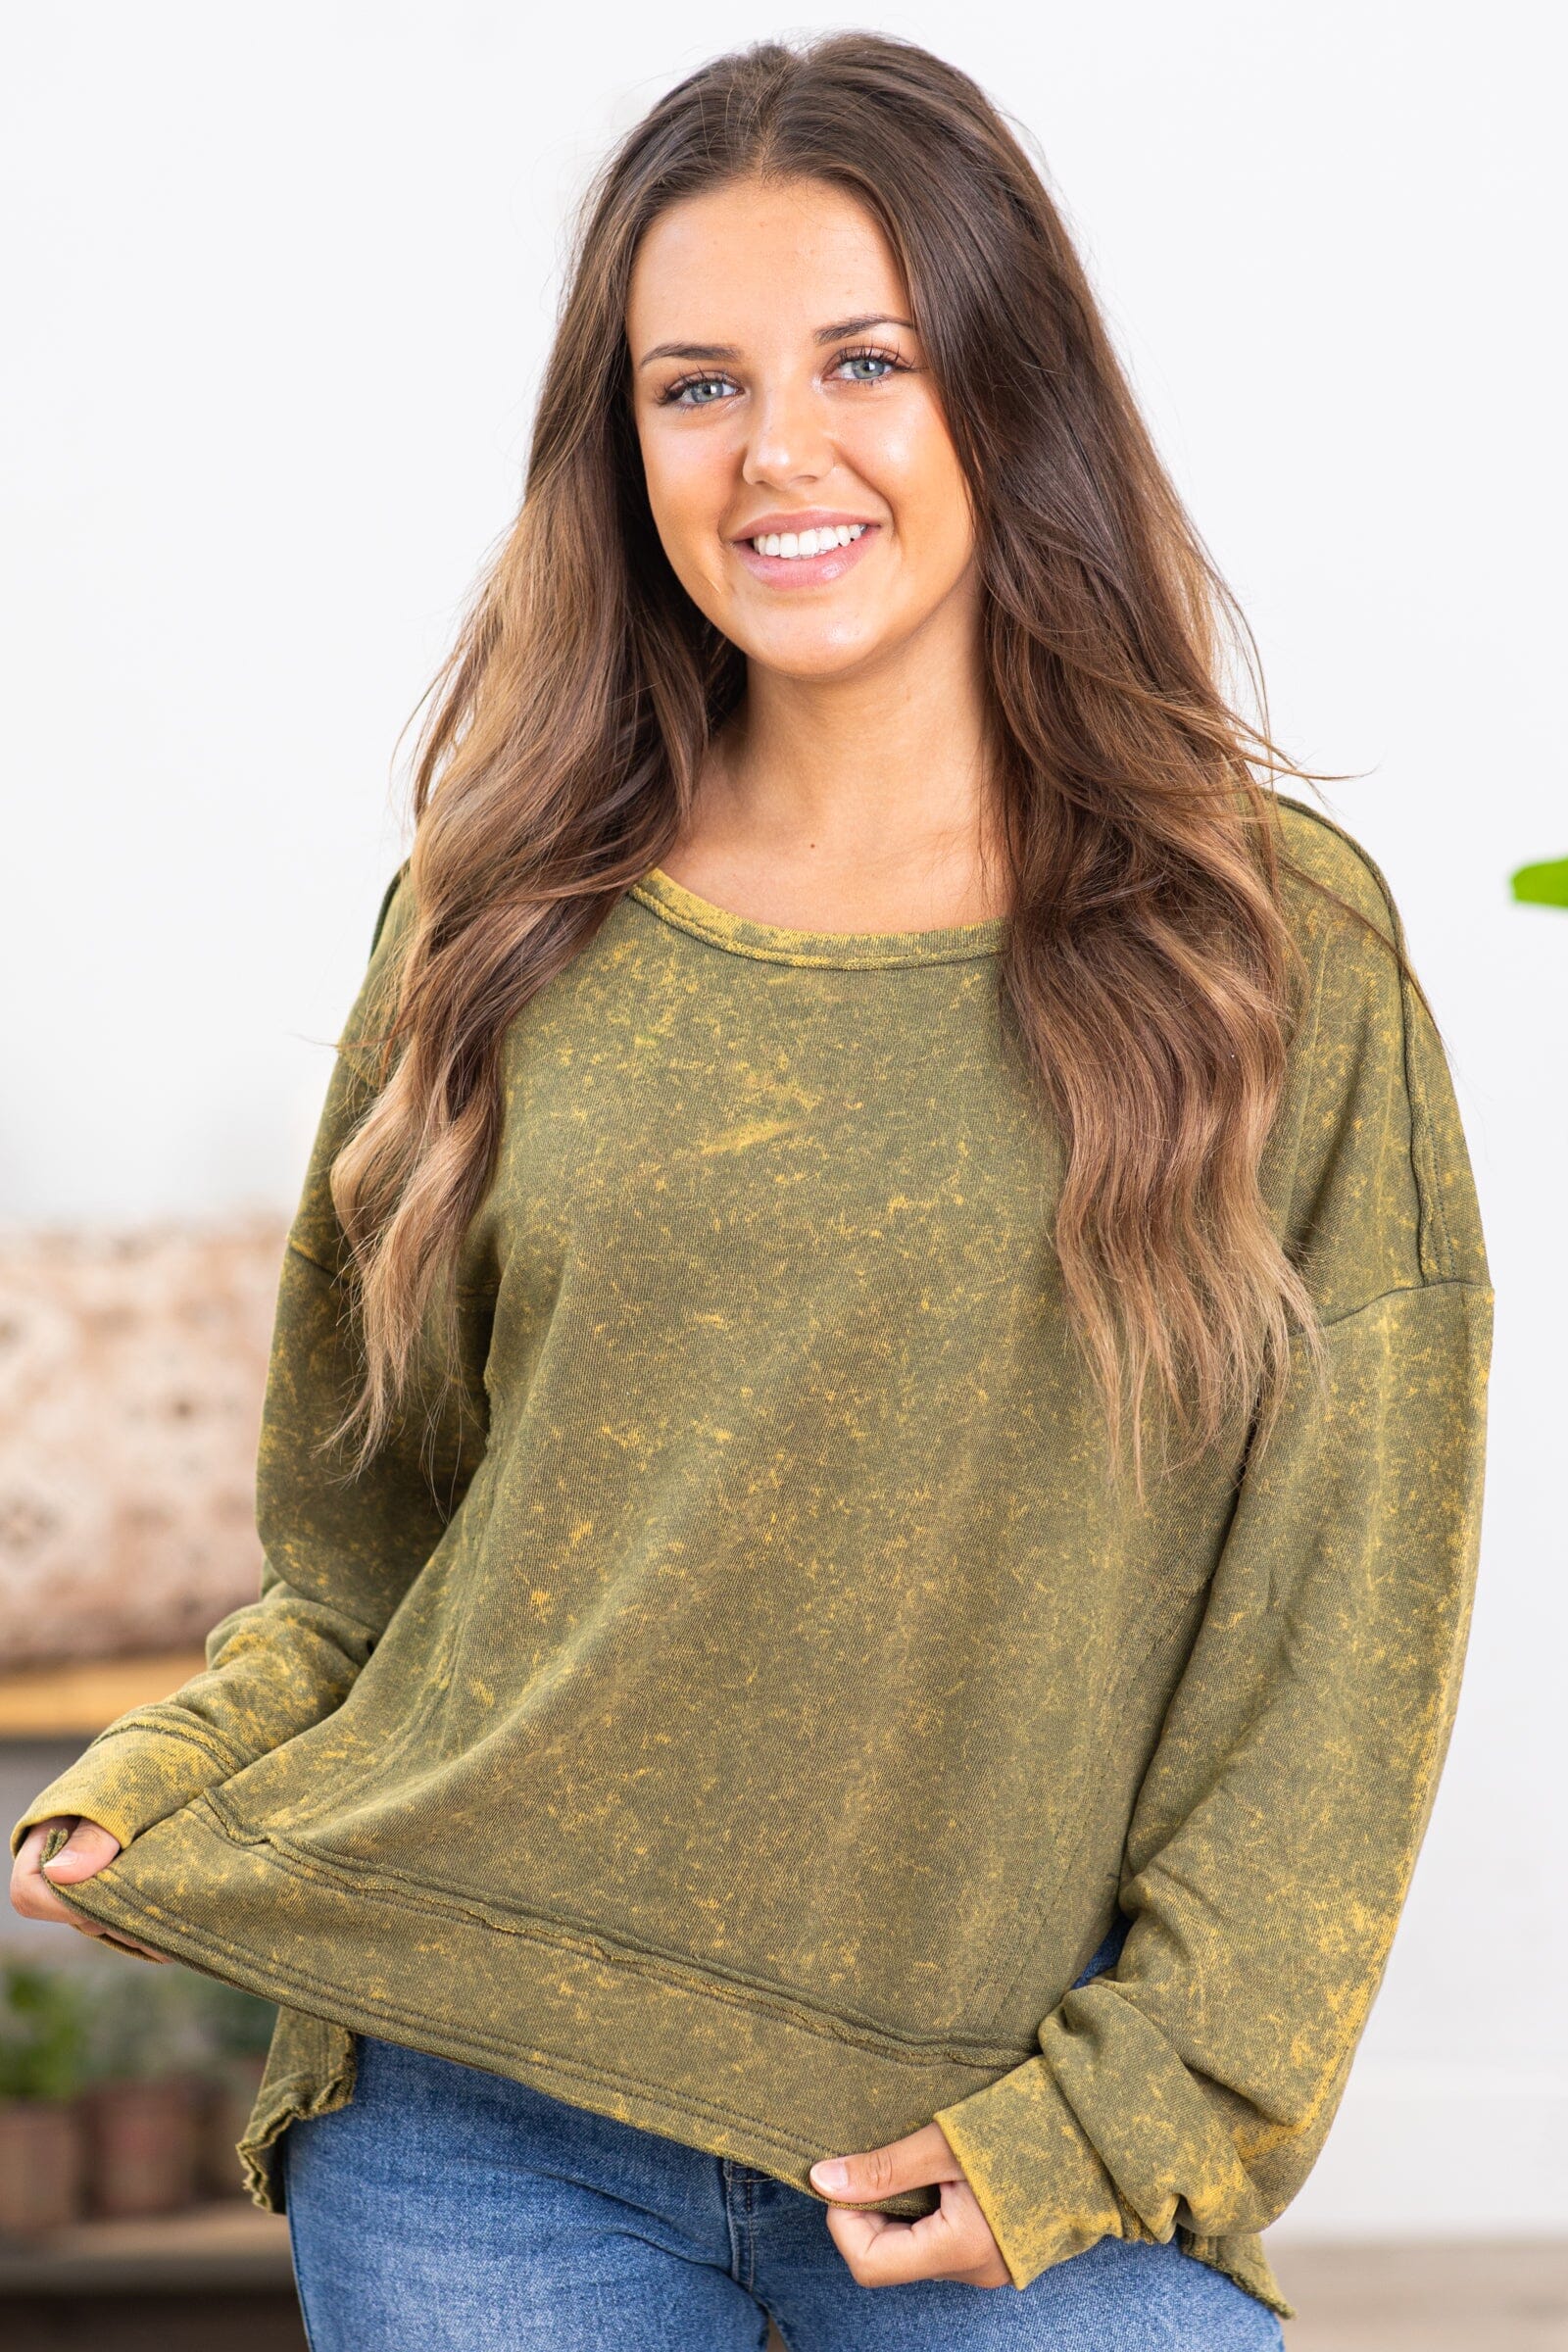 Olive Mineral Washed Sweatshirt - Filly Flair